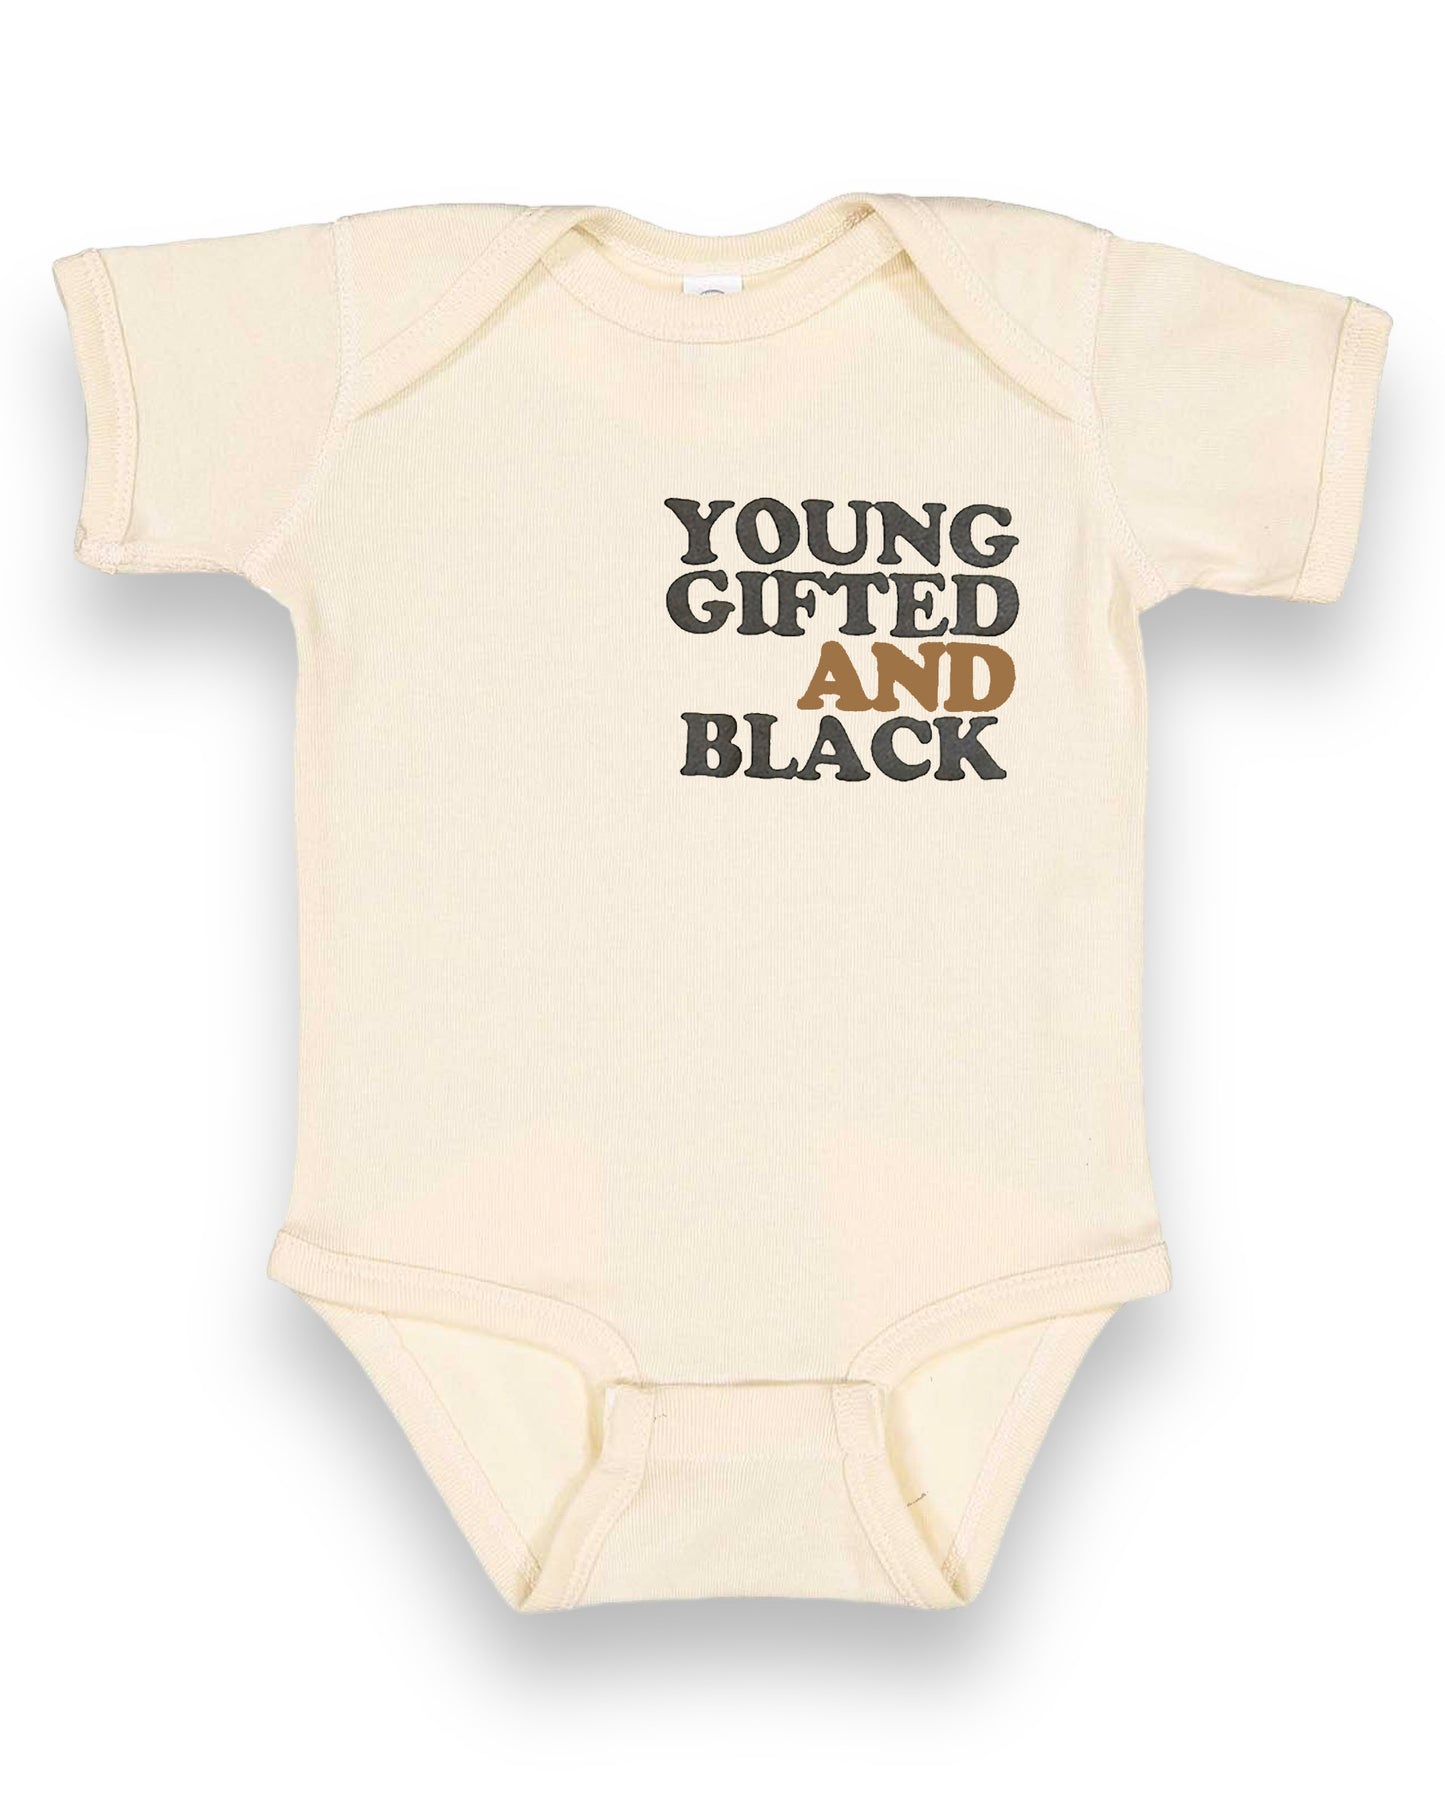 Young Gifted Black Tan Baby Onesie